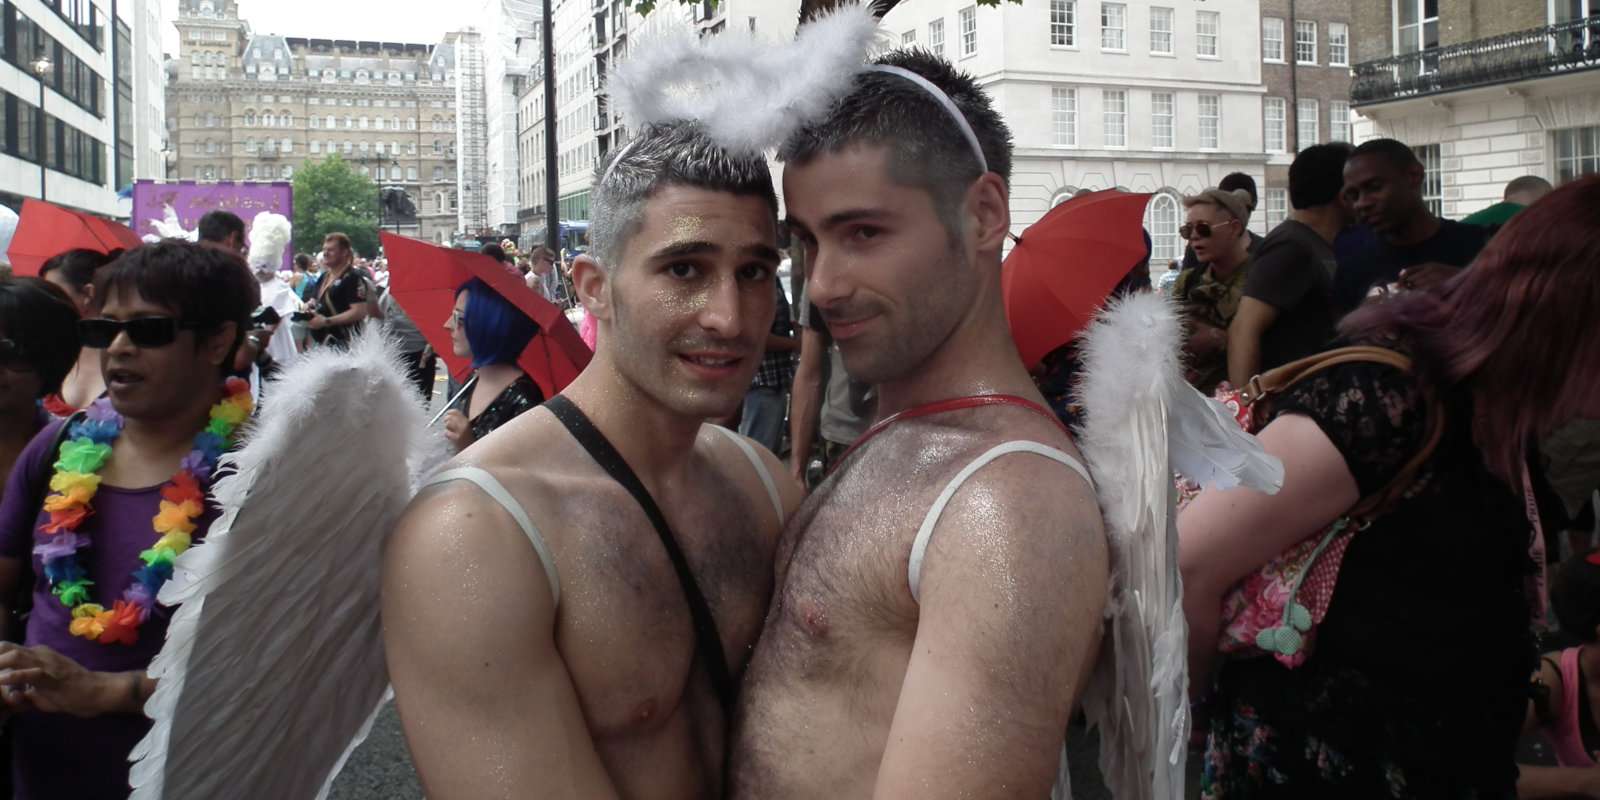 Read all about the best gay parties and events taking place during Pride NYC in our guide.